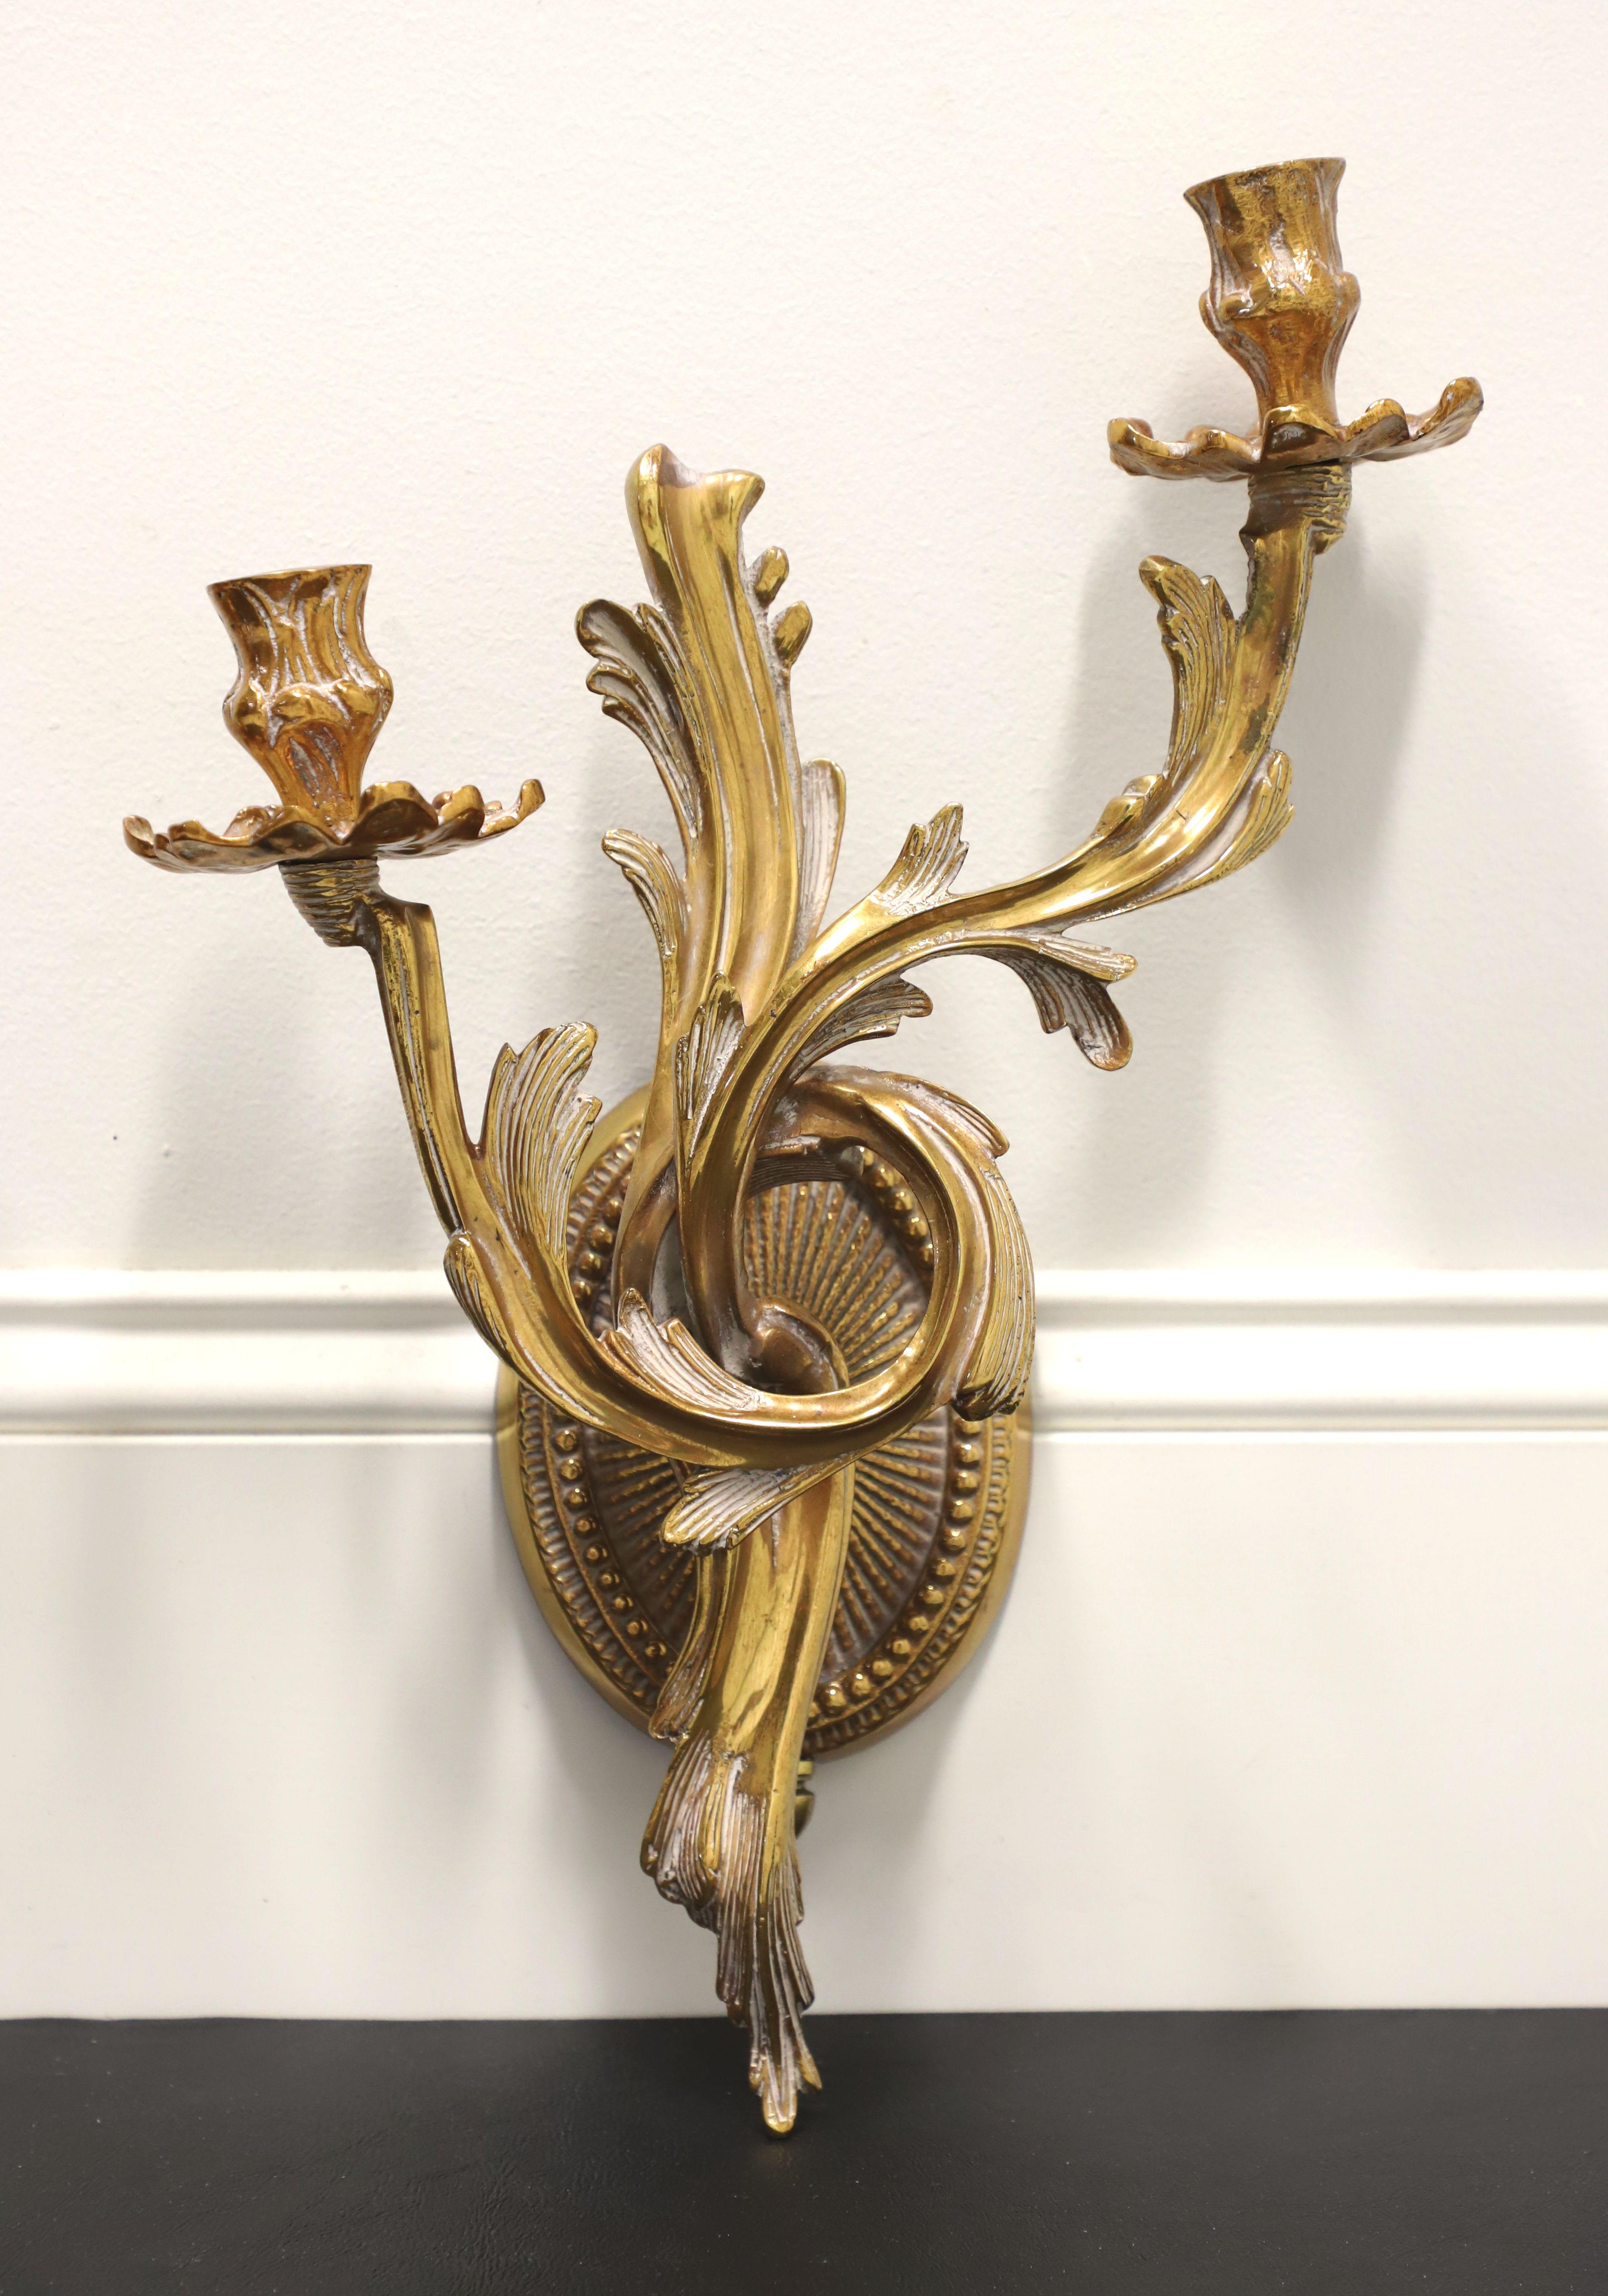 FREDERICK COOPER Solid Brass Rococo Style Candle Wall Sconces - Pair In Good Condition For Sale In Charlotte, NC